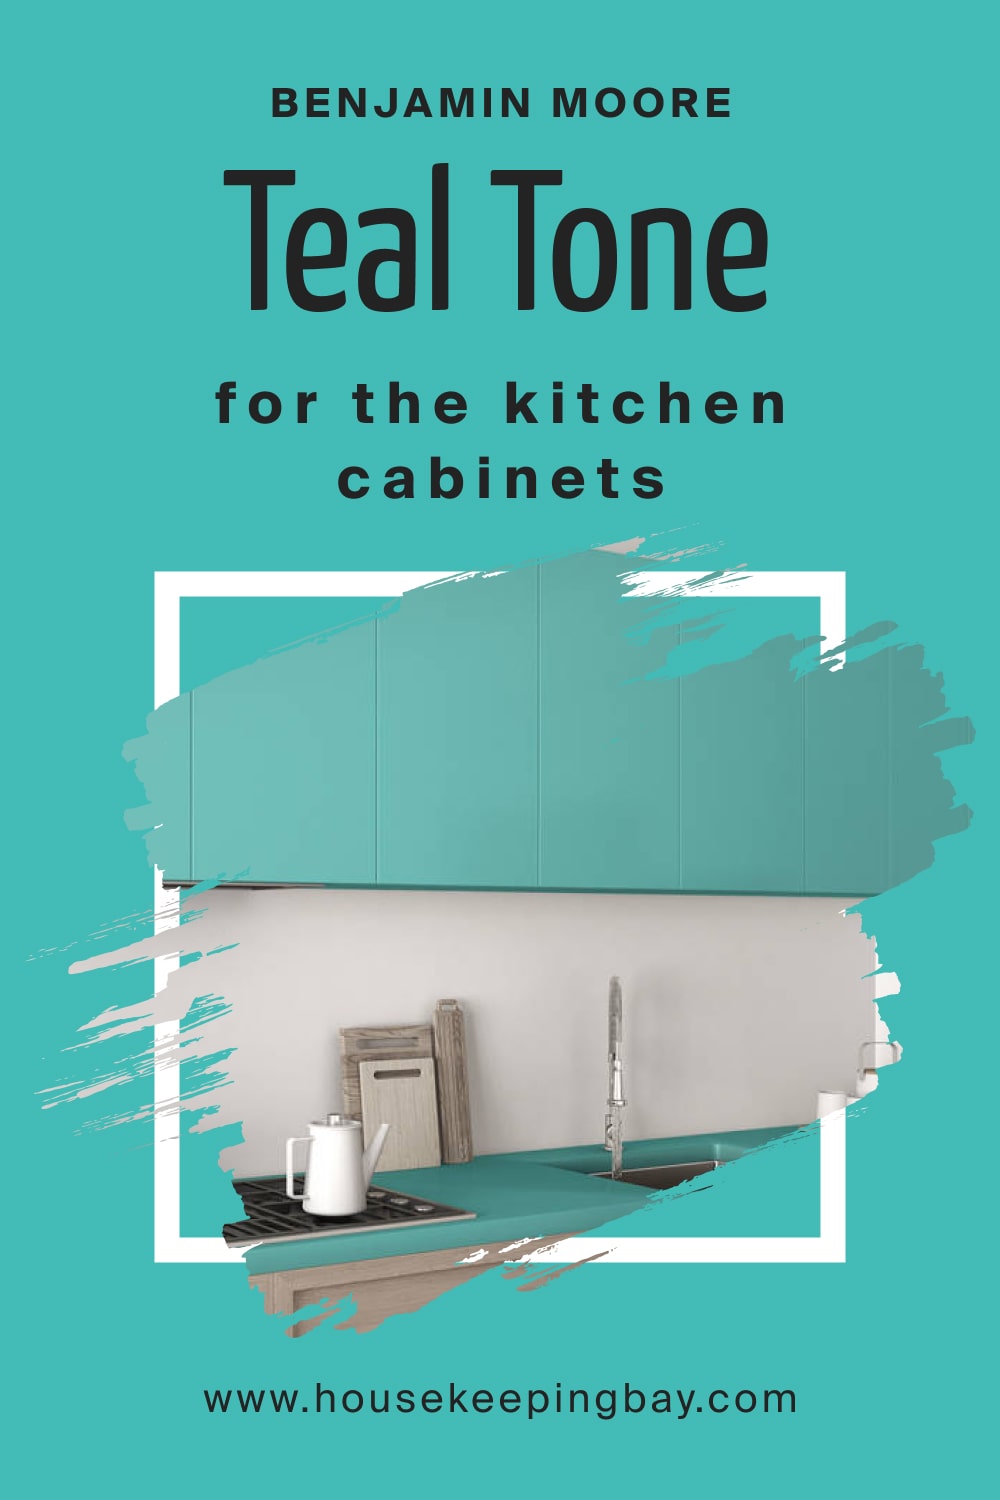 Benjamin Moore. BM Teal Tone 663 for the Kitchen Cabinets